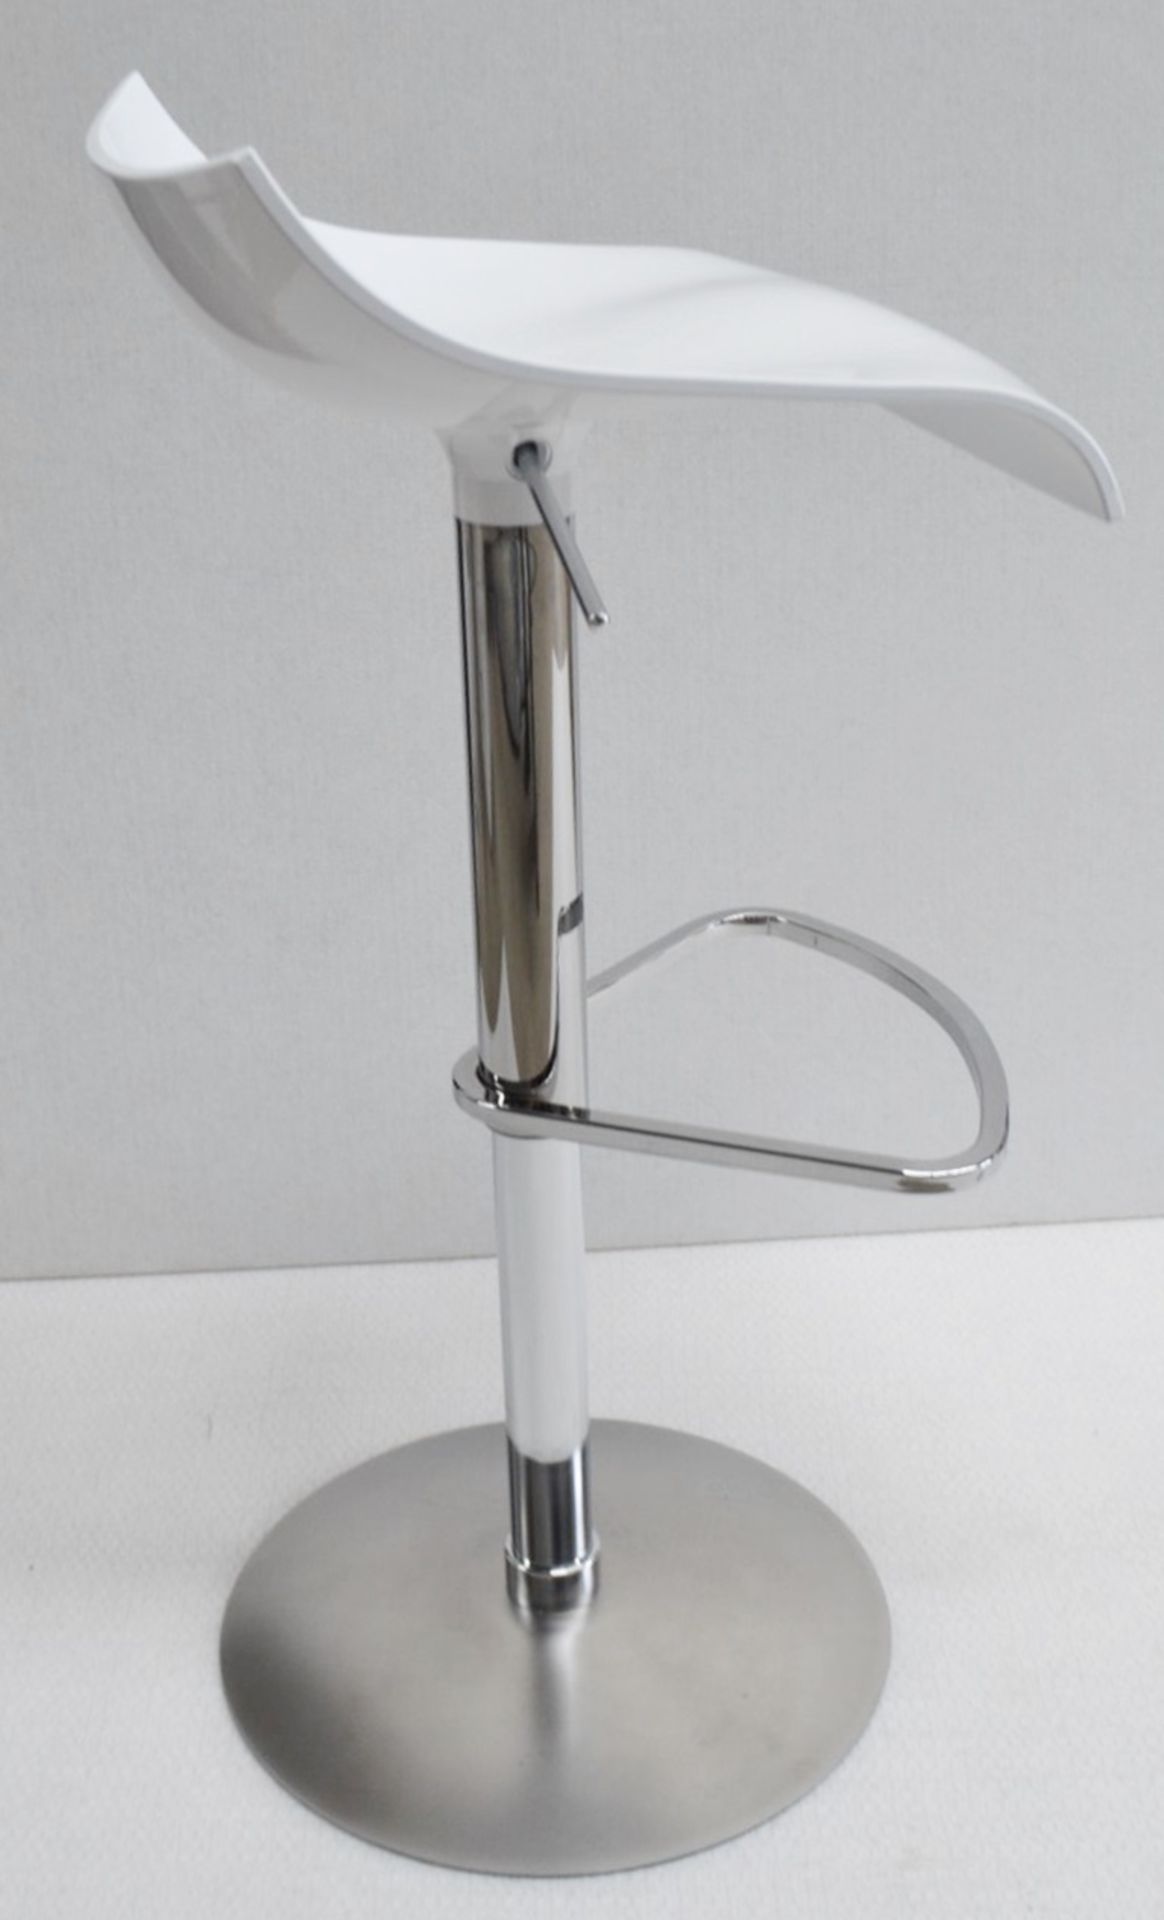 1 x LIGNE ROSET PAM Designer Bar Stool In White 'Synderme' Leather With a Chromed Metal Base - Image 5 of 7